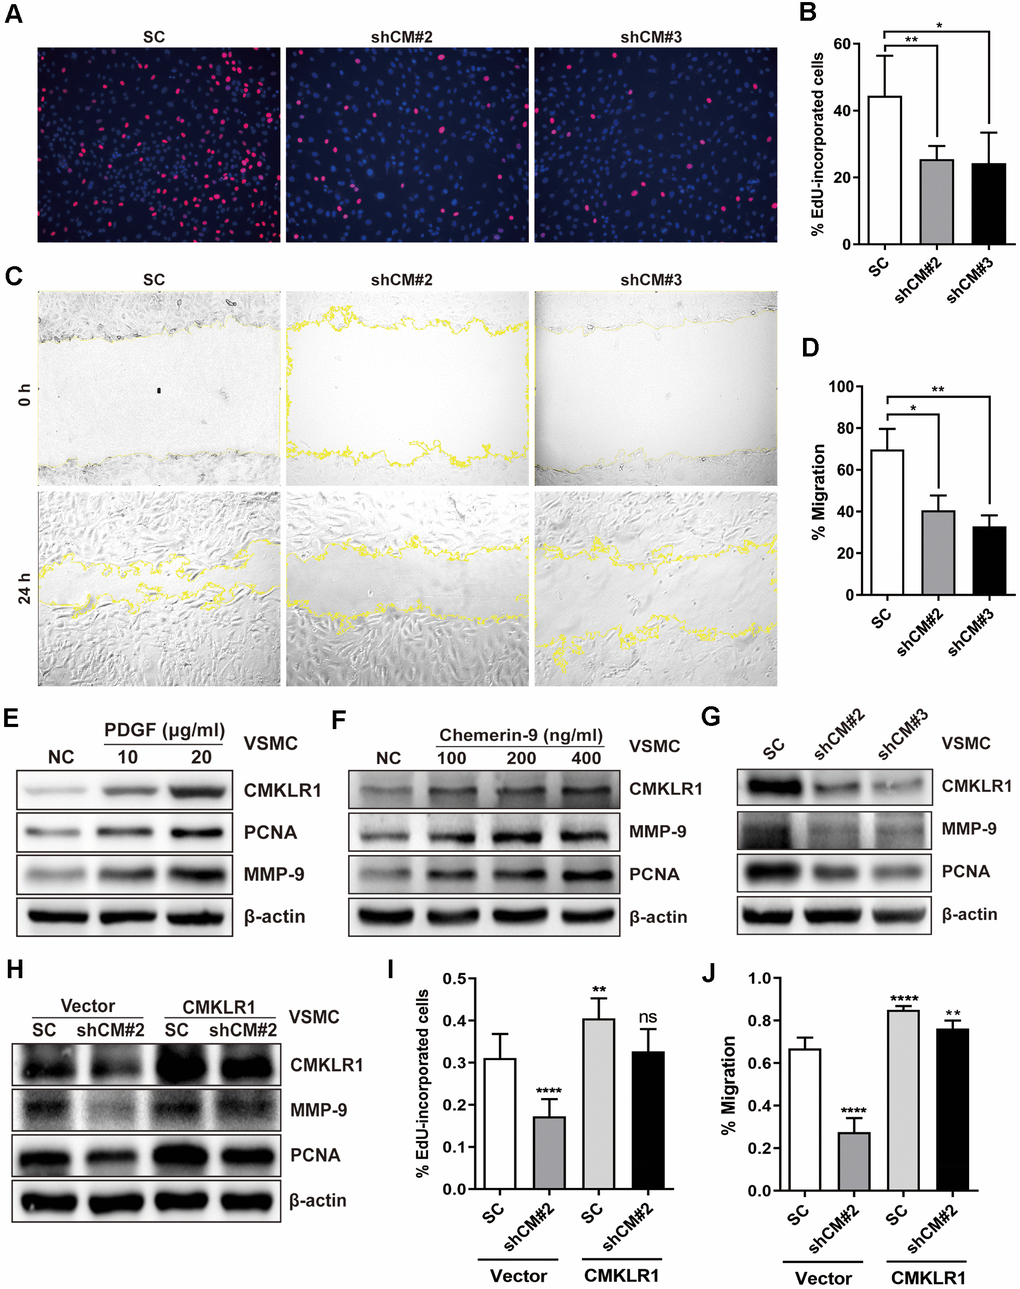 Downregulation of CMKLR1 inhibit VSMCs proliferation and migration. (A, B) Percentage of 5-Ethynyl-2'-deoxyuridine (EdU)-incorporated cells following the application of two independent shRNAs targeting CMKLR1 (scramble control, SC; shCMKLR1#2, shCM#2; shCMKLR1#3, shCM#3) to knock down CMKLR1 expression in mice vascular smooth muscle cells (VSMCs). *, ppC, D) Percentage of cell migration as determined by wound healing assay. *, ppE) Western blots showing CMKLR1, MMP-9 and PCNA expressions in cells treated with PDGF (48 h) for different durations. (F) Western blots showing CMKLR1, matrix metalloproteinase-9 (MMP-9) and proliferating cell nuclear antigen (PCNA) expression in cells treated with chemerin-9 (48 h) for different durations. (G) Western blots showing CMKLR1, MMP-9 and PCNA expressions with or without CMKLR1 knockdown. (H) Western blots showing CMKLR1, MMP-9 and PCNA expressions following the application of plasmids encoding CMKLR1 to overexpress CMKLR1 expression in VSMCs with or without CMKLR1 knockdown. (I) Analysis of the percentage EdU-incorporated cells with or without LCN2 depletion. ****, ppJ) Percentage of cell migration as determined by wound healing assay. ****, pp